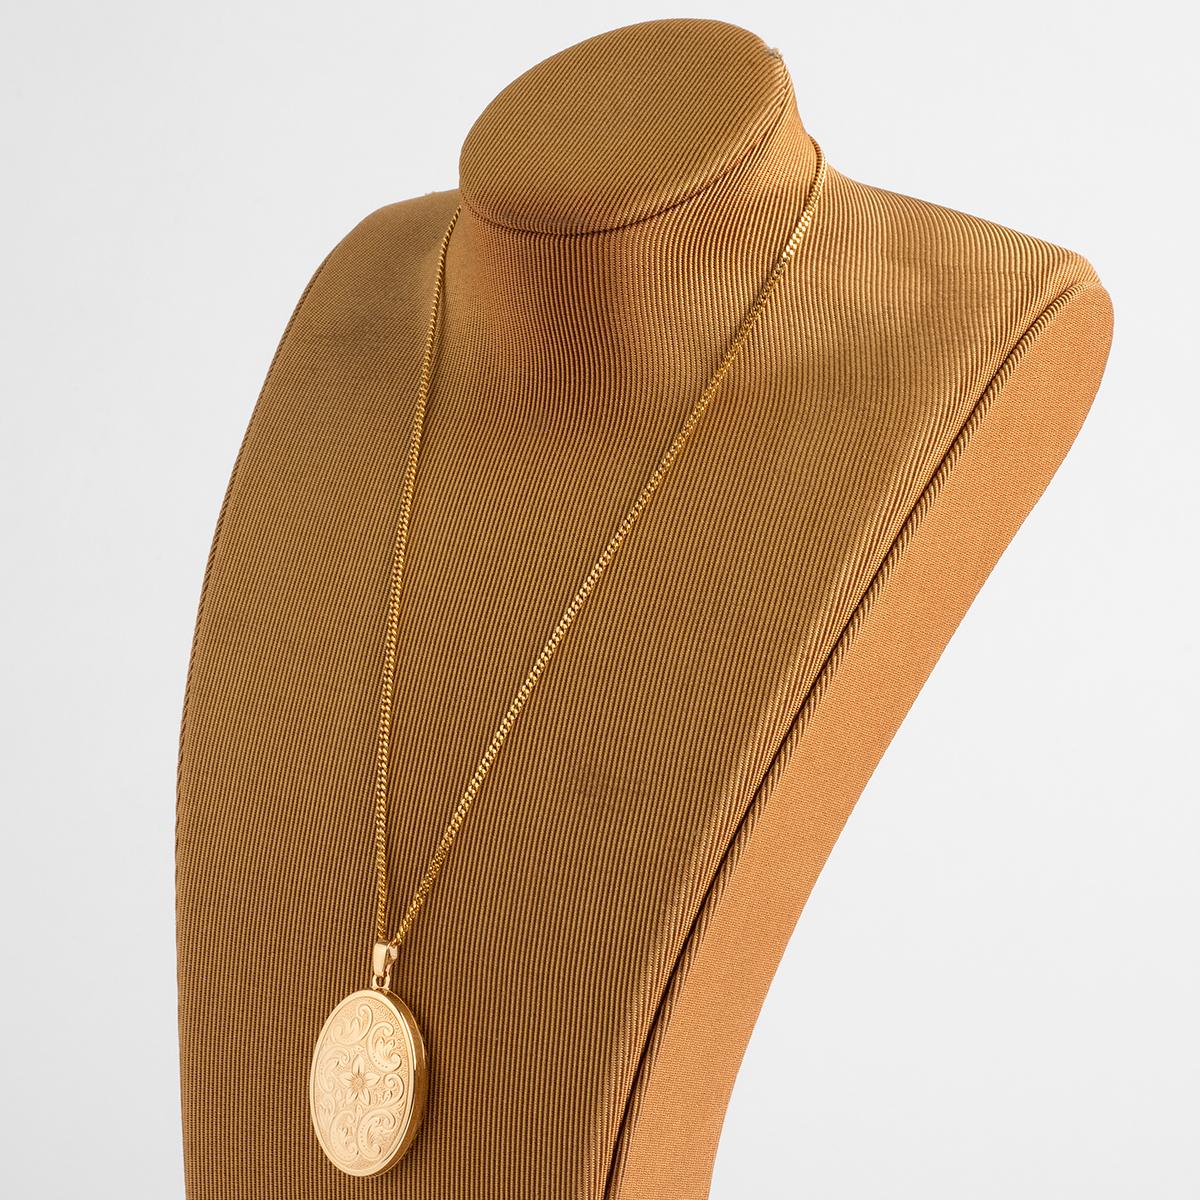 A unique piece within our carefully curated Vintage & Prestige fine jewellery collection, we are delighted to present the following:

This classic and generous engraved 9K yellow gold locket measures 20mm x 30mm and comes with a yellow gold chain